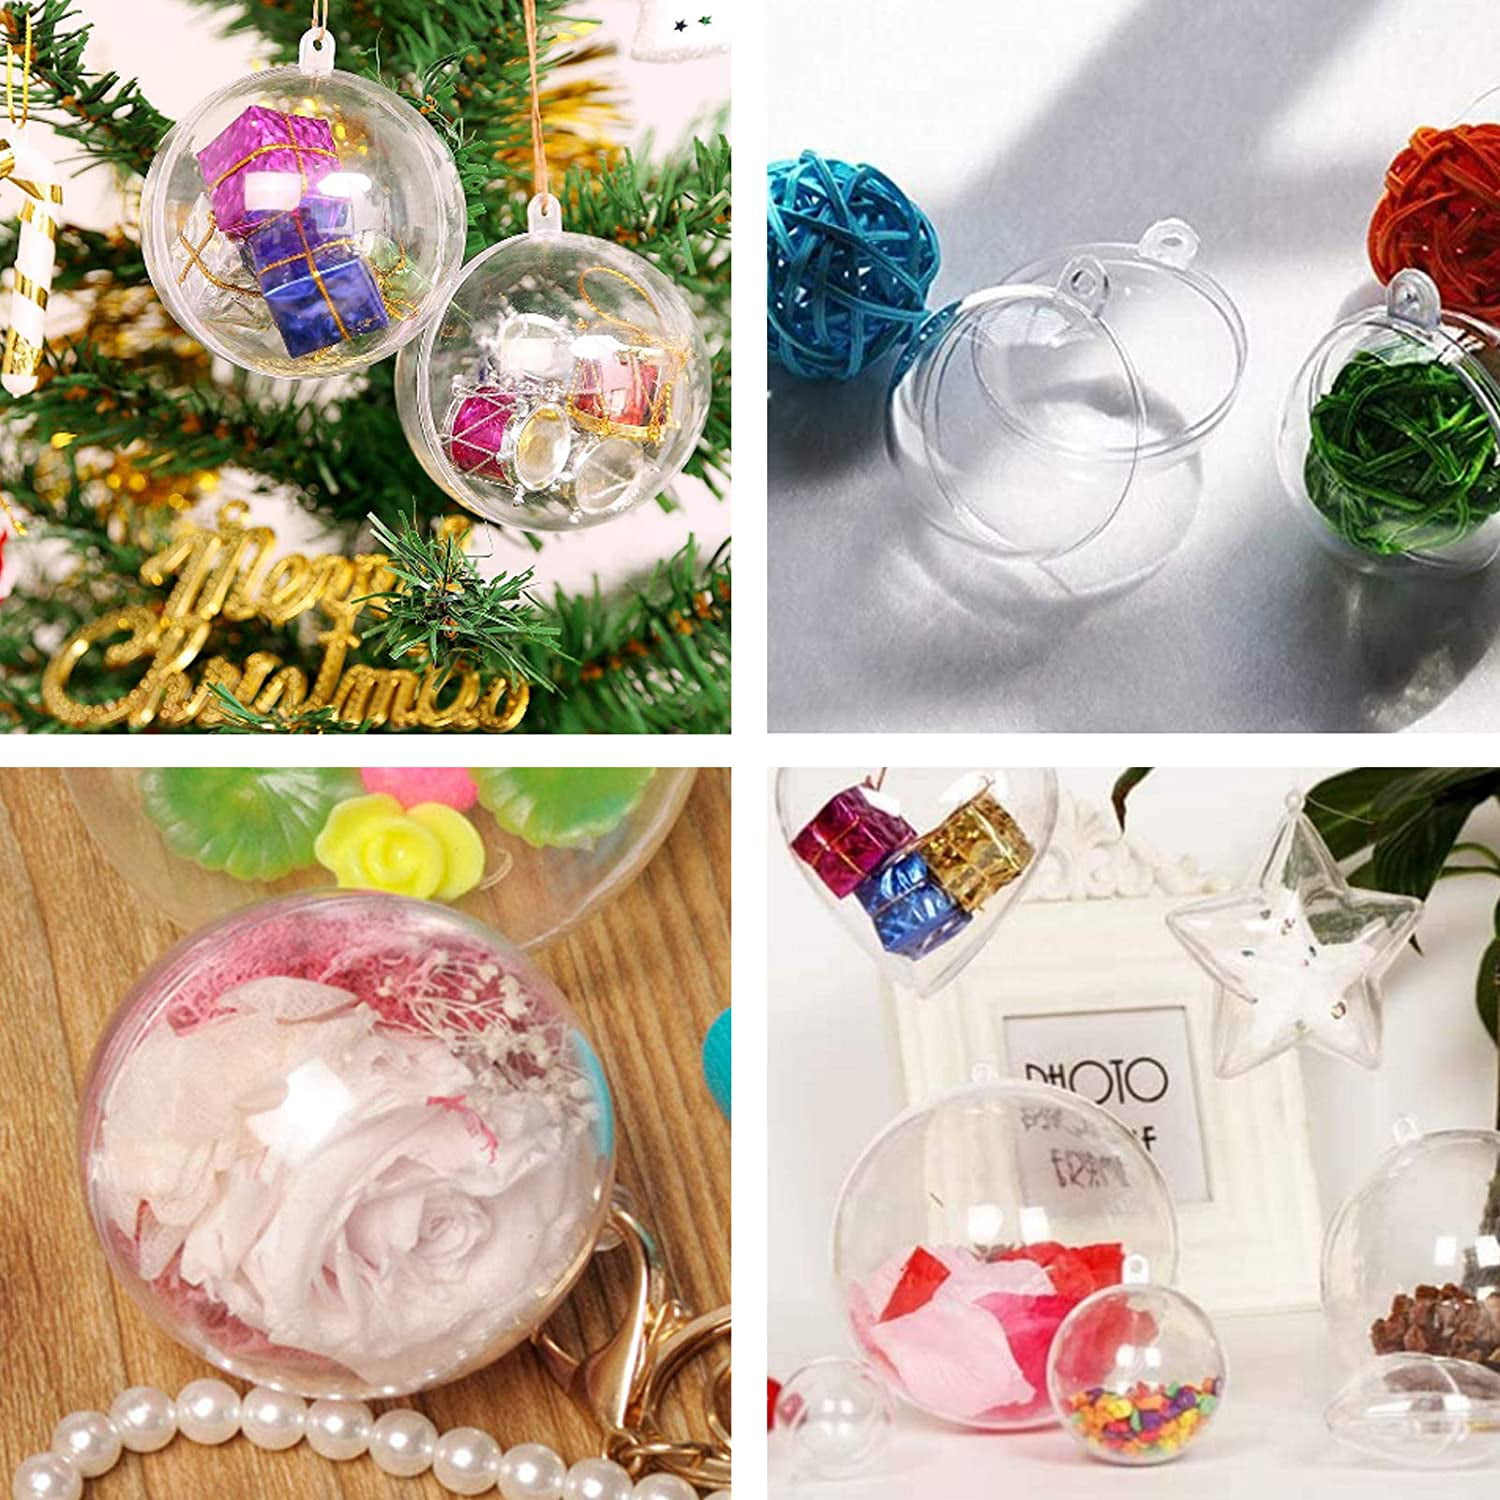 10 Pack 3.94'' Clear Plastic Ornaments for Crafts Fillable, Clear 3.94 in